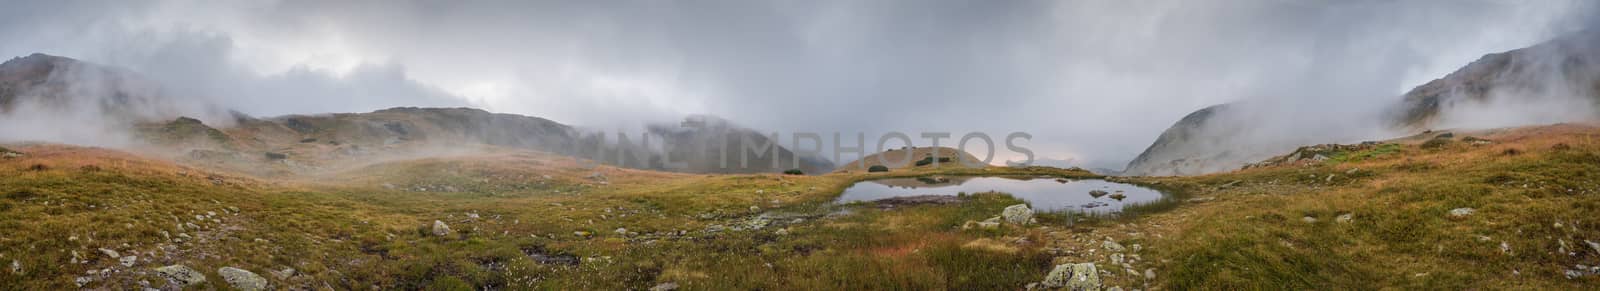 Wide Panoramic View of Small Tarn with Fog in West Tatra Mountains at Sunset